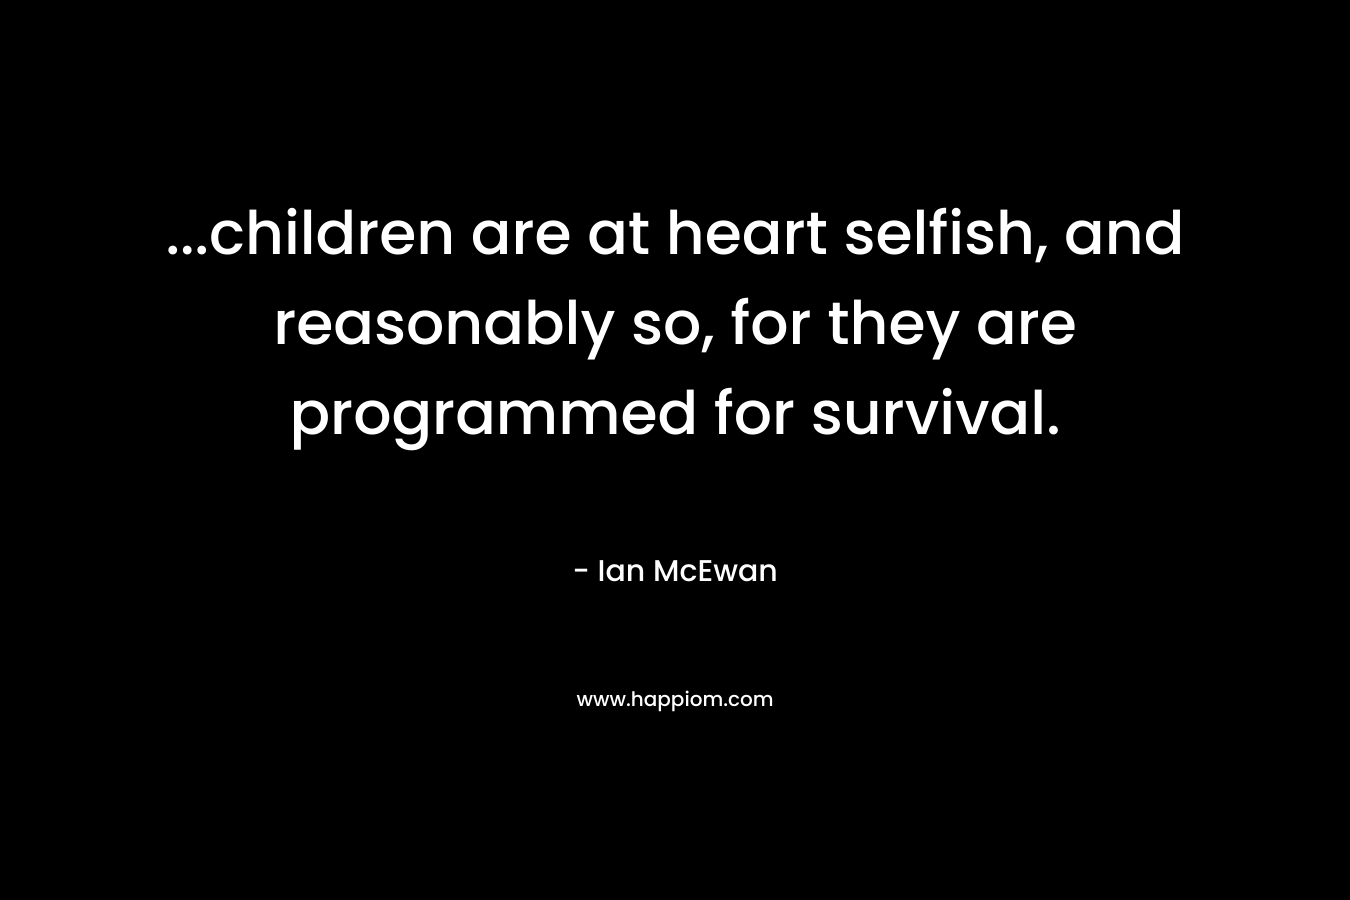 …children are at heart selfish, and reasonably so, for they are programmed for survival. – Ian McEwan